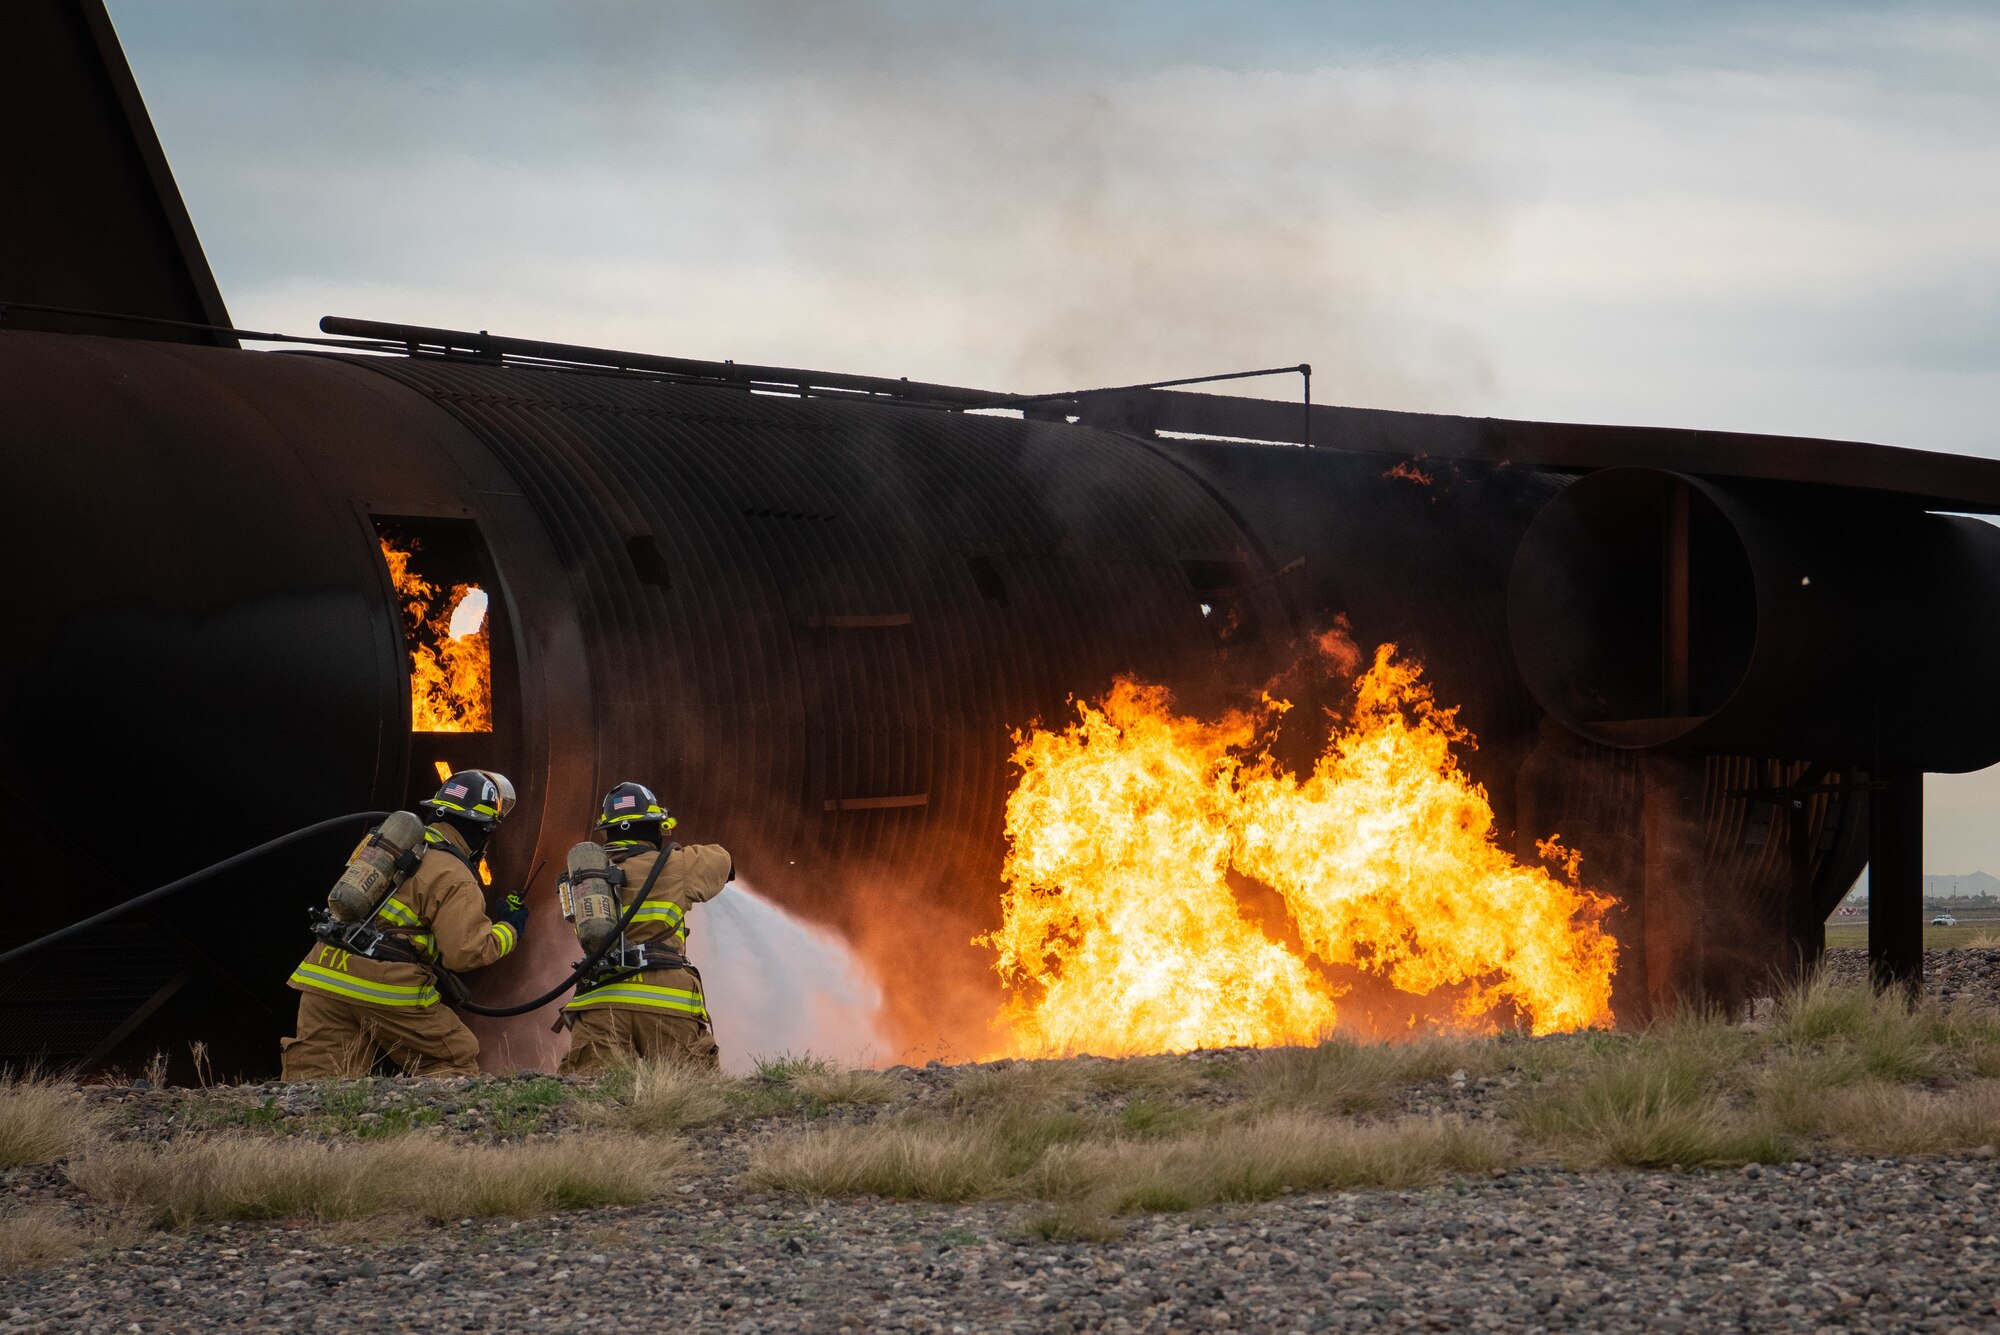 56th Civil Engineer Squadron firefighters spray water at a fuselage fire during a joint aircraft and structural live fire training, Nov. 14, 2018 at Luke Air Force Base, Ariz.